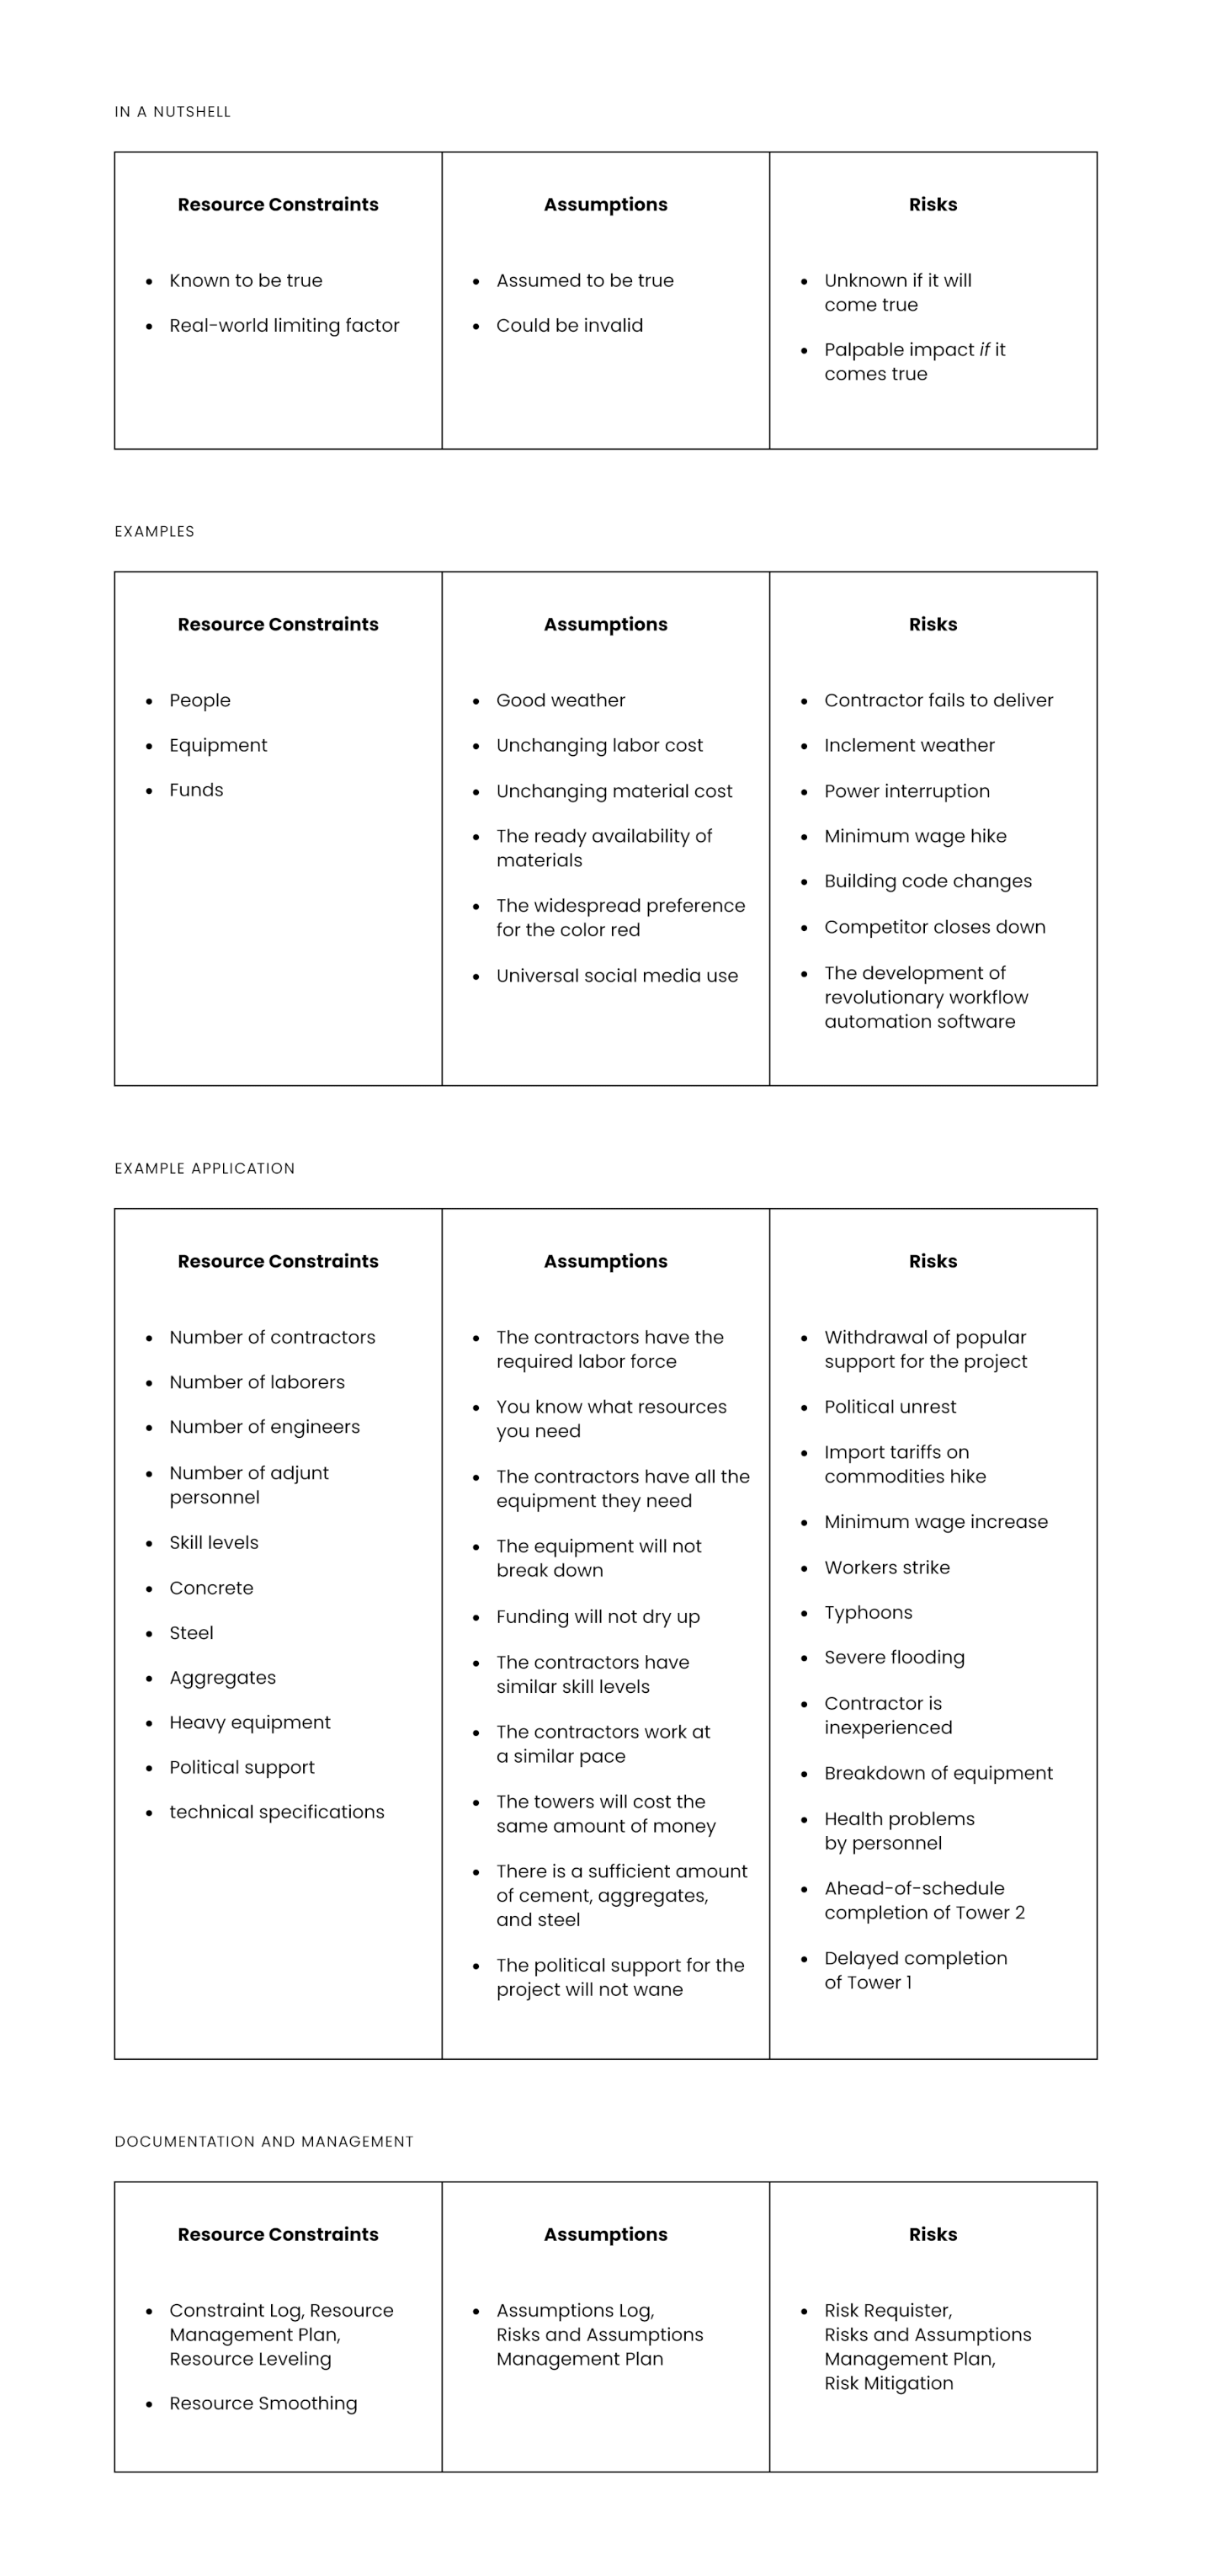 4 tables showing the resource constraints, assumptions, and risks overall, with an example, with example applications, and documentation and management